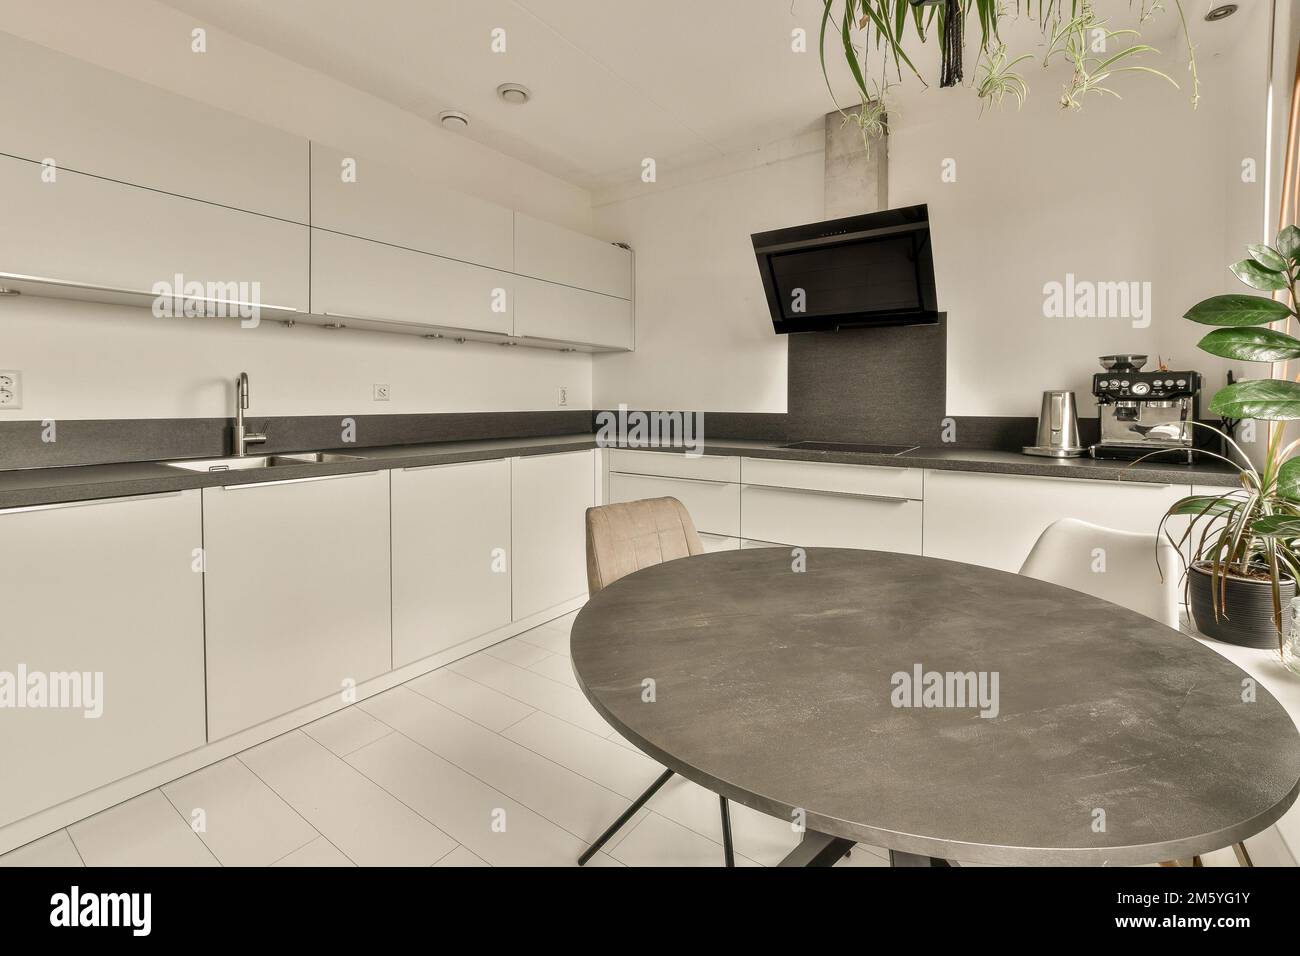 a small kitchen with white cabinets and black counter tops on the counters in this photo is taken from the inside Stock Photo